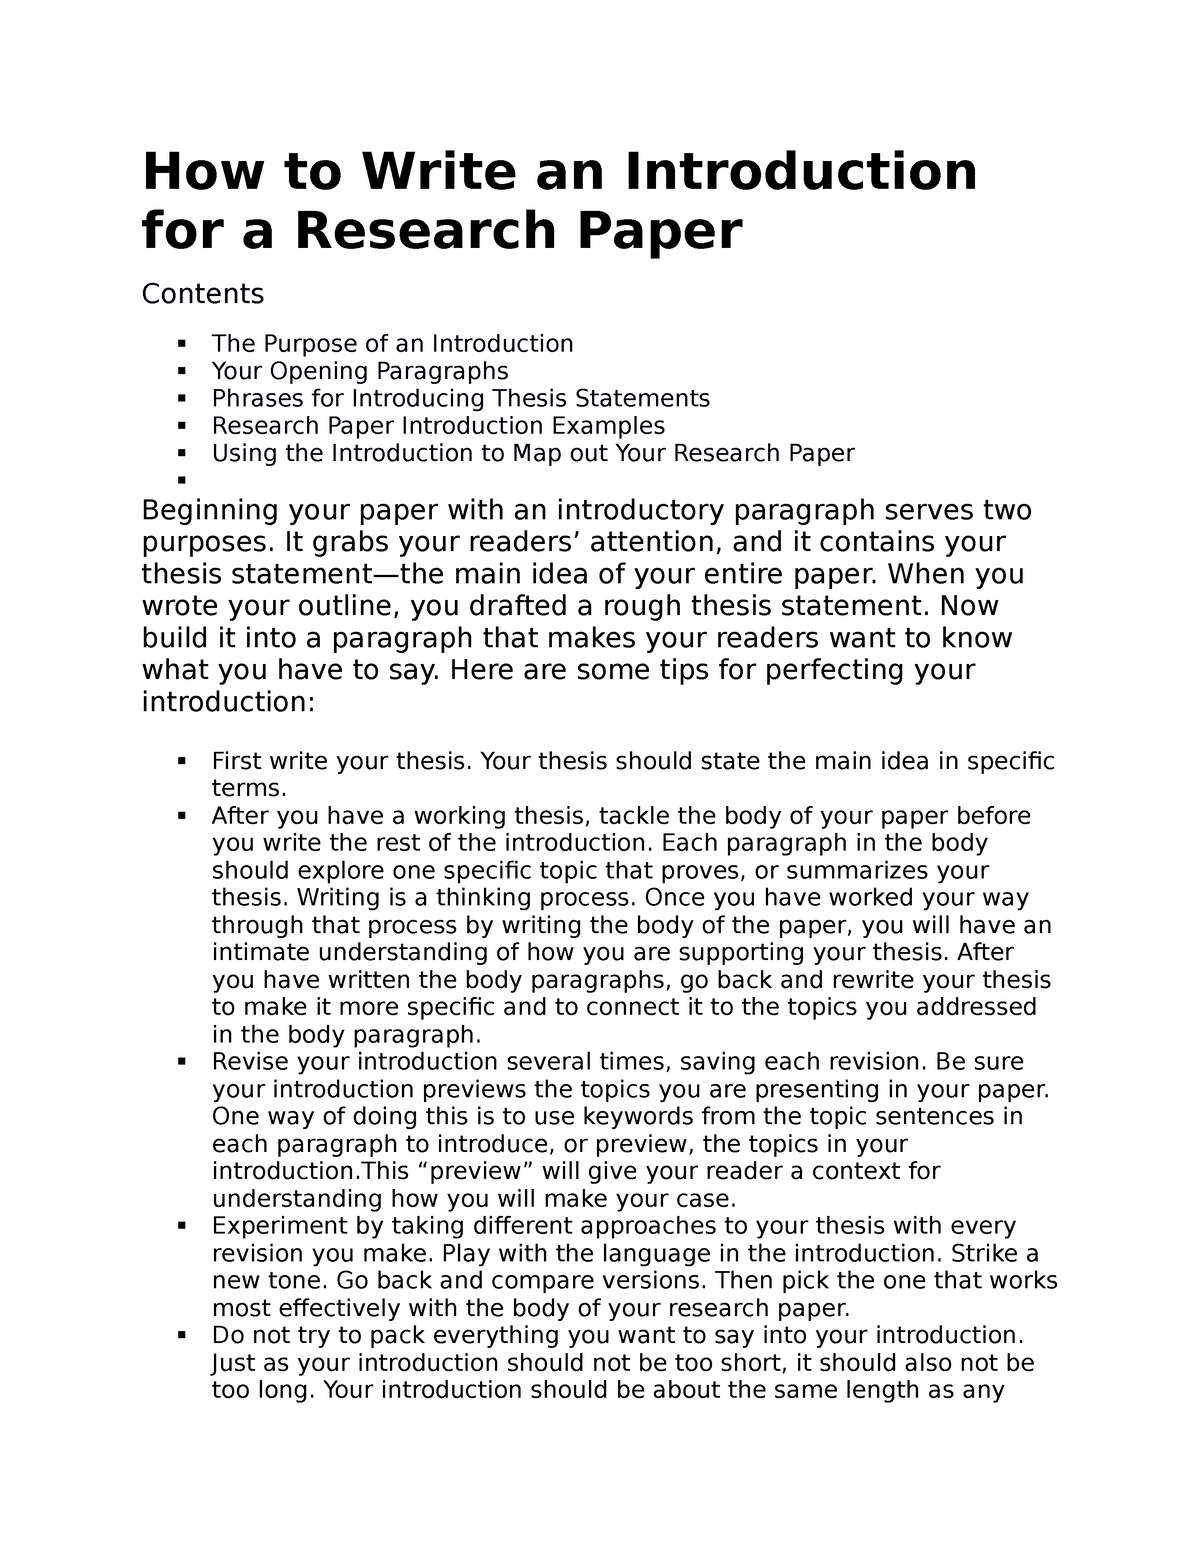 how do you write an introduction for research paper